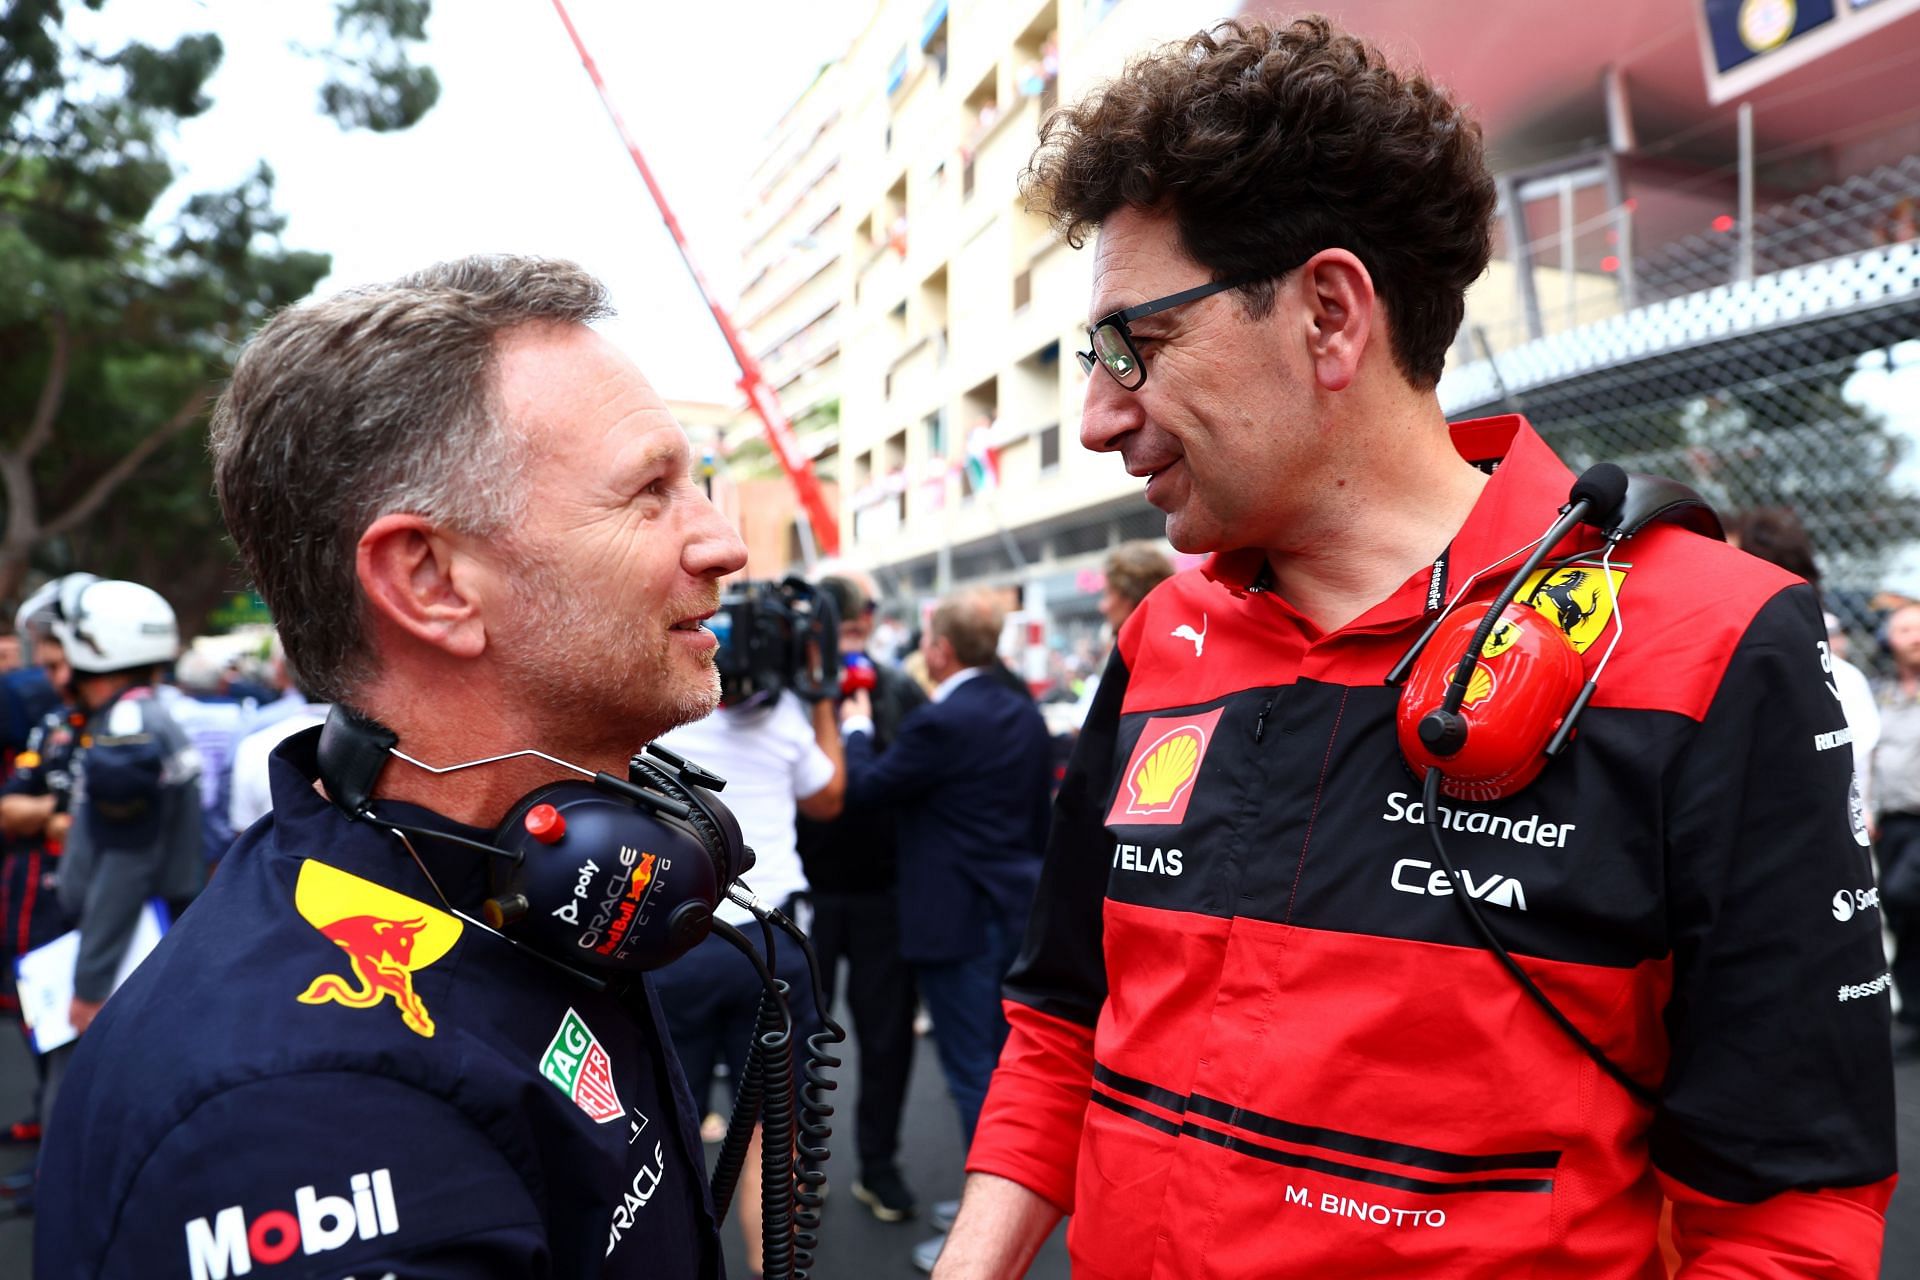 Red Bull team principal Christian Horner (left) and Ferrari team principal Mattia Binotto (right) speak to each other during the 2022 F1 Monaco GP weekend. (Photo by Mark Thompson/Getty Images)